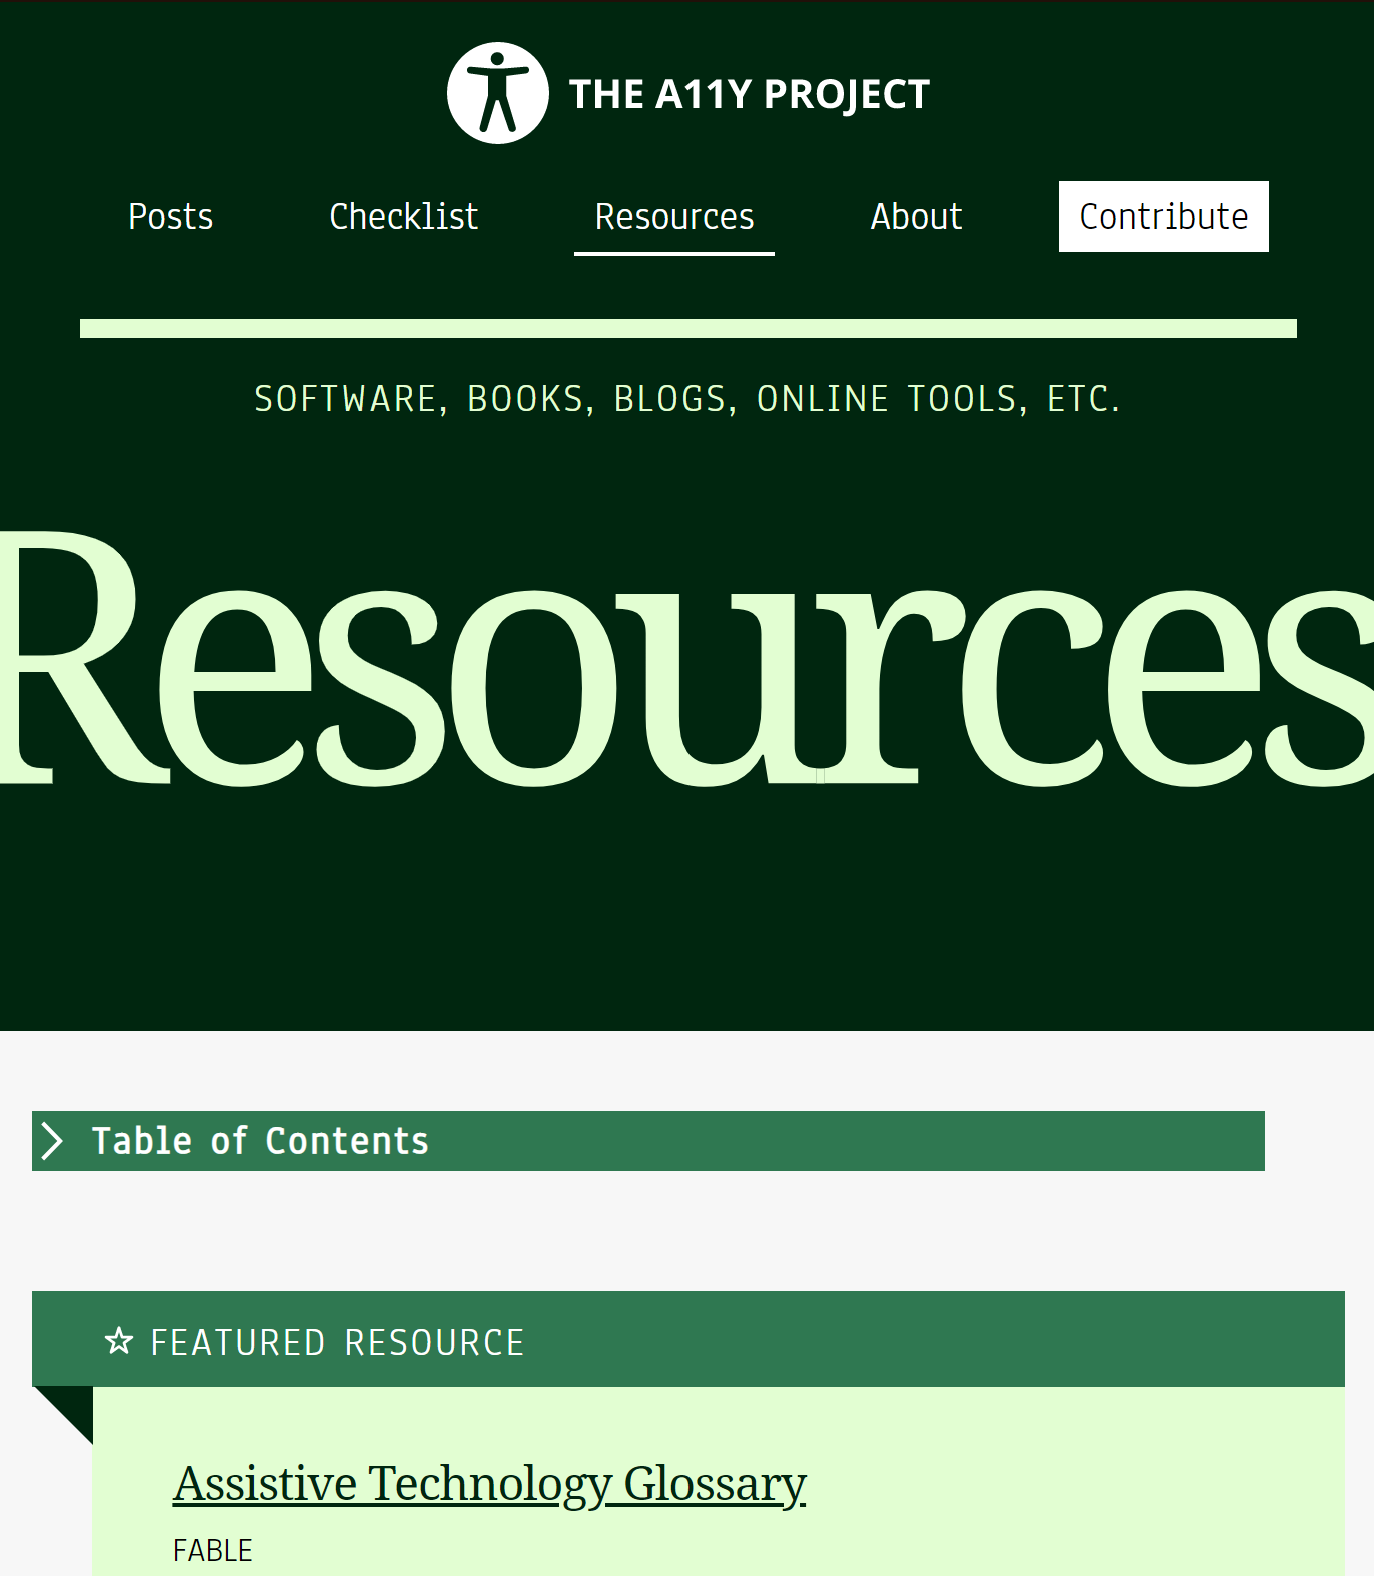 screenshot of the top half of the resources page of a11yproject.com